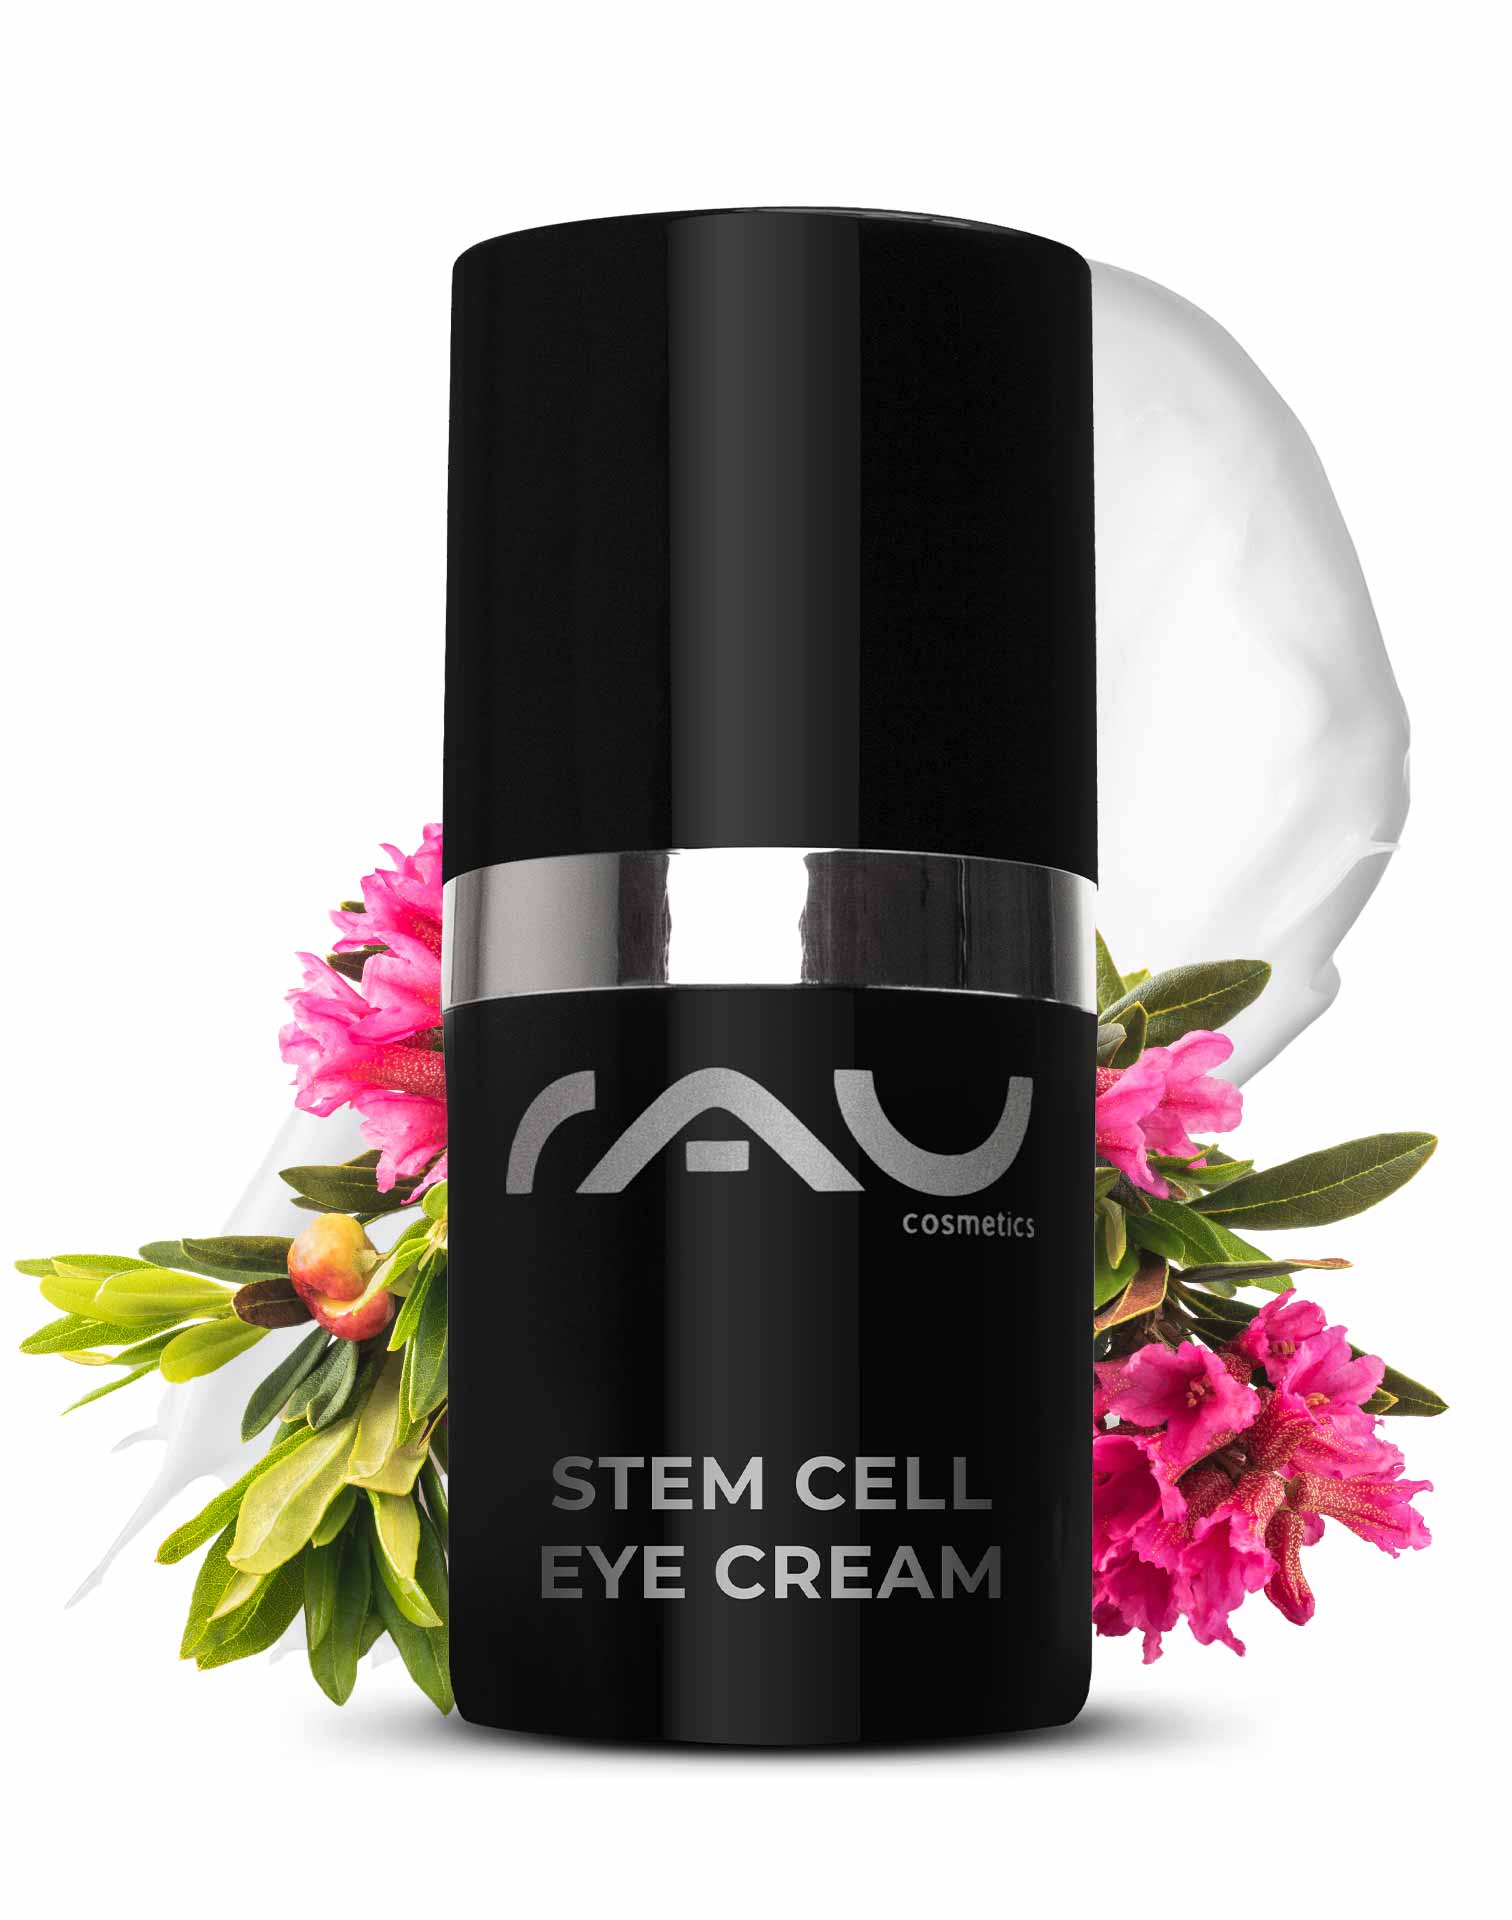 RAU Stem Cell Eye Cream 15 ml - Luxurious Anti-Aging Eye Cream with Stem Cell Extracts